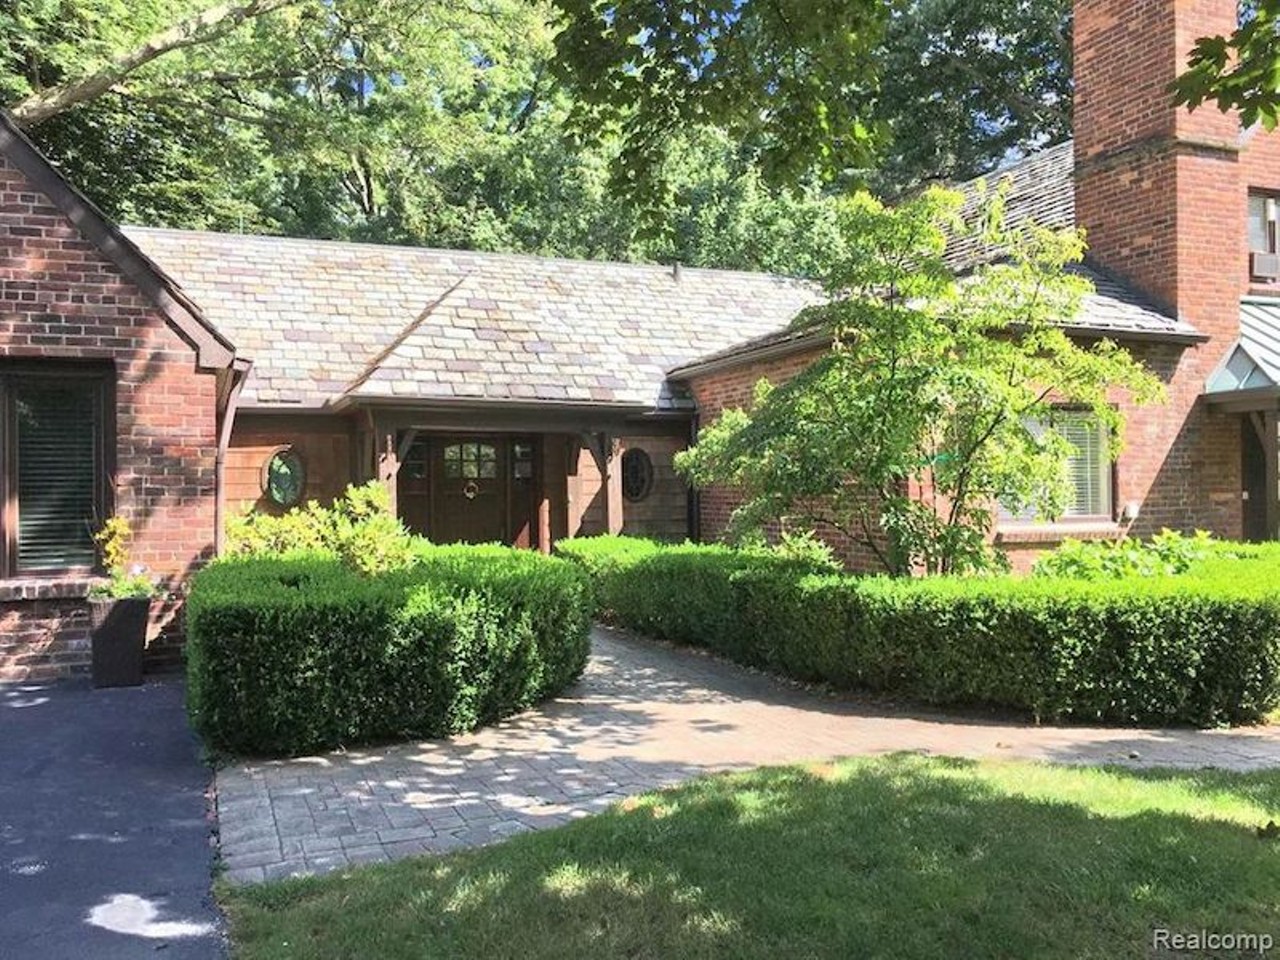 John DeLorean's stunning former metro Detroit home doesn't have gull-wing doors &#151;&nbsp;but it is for sale